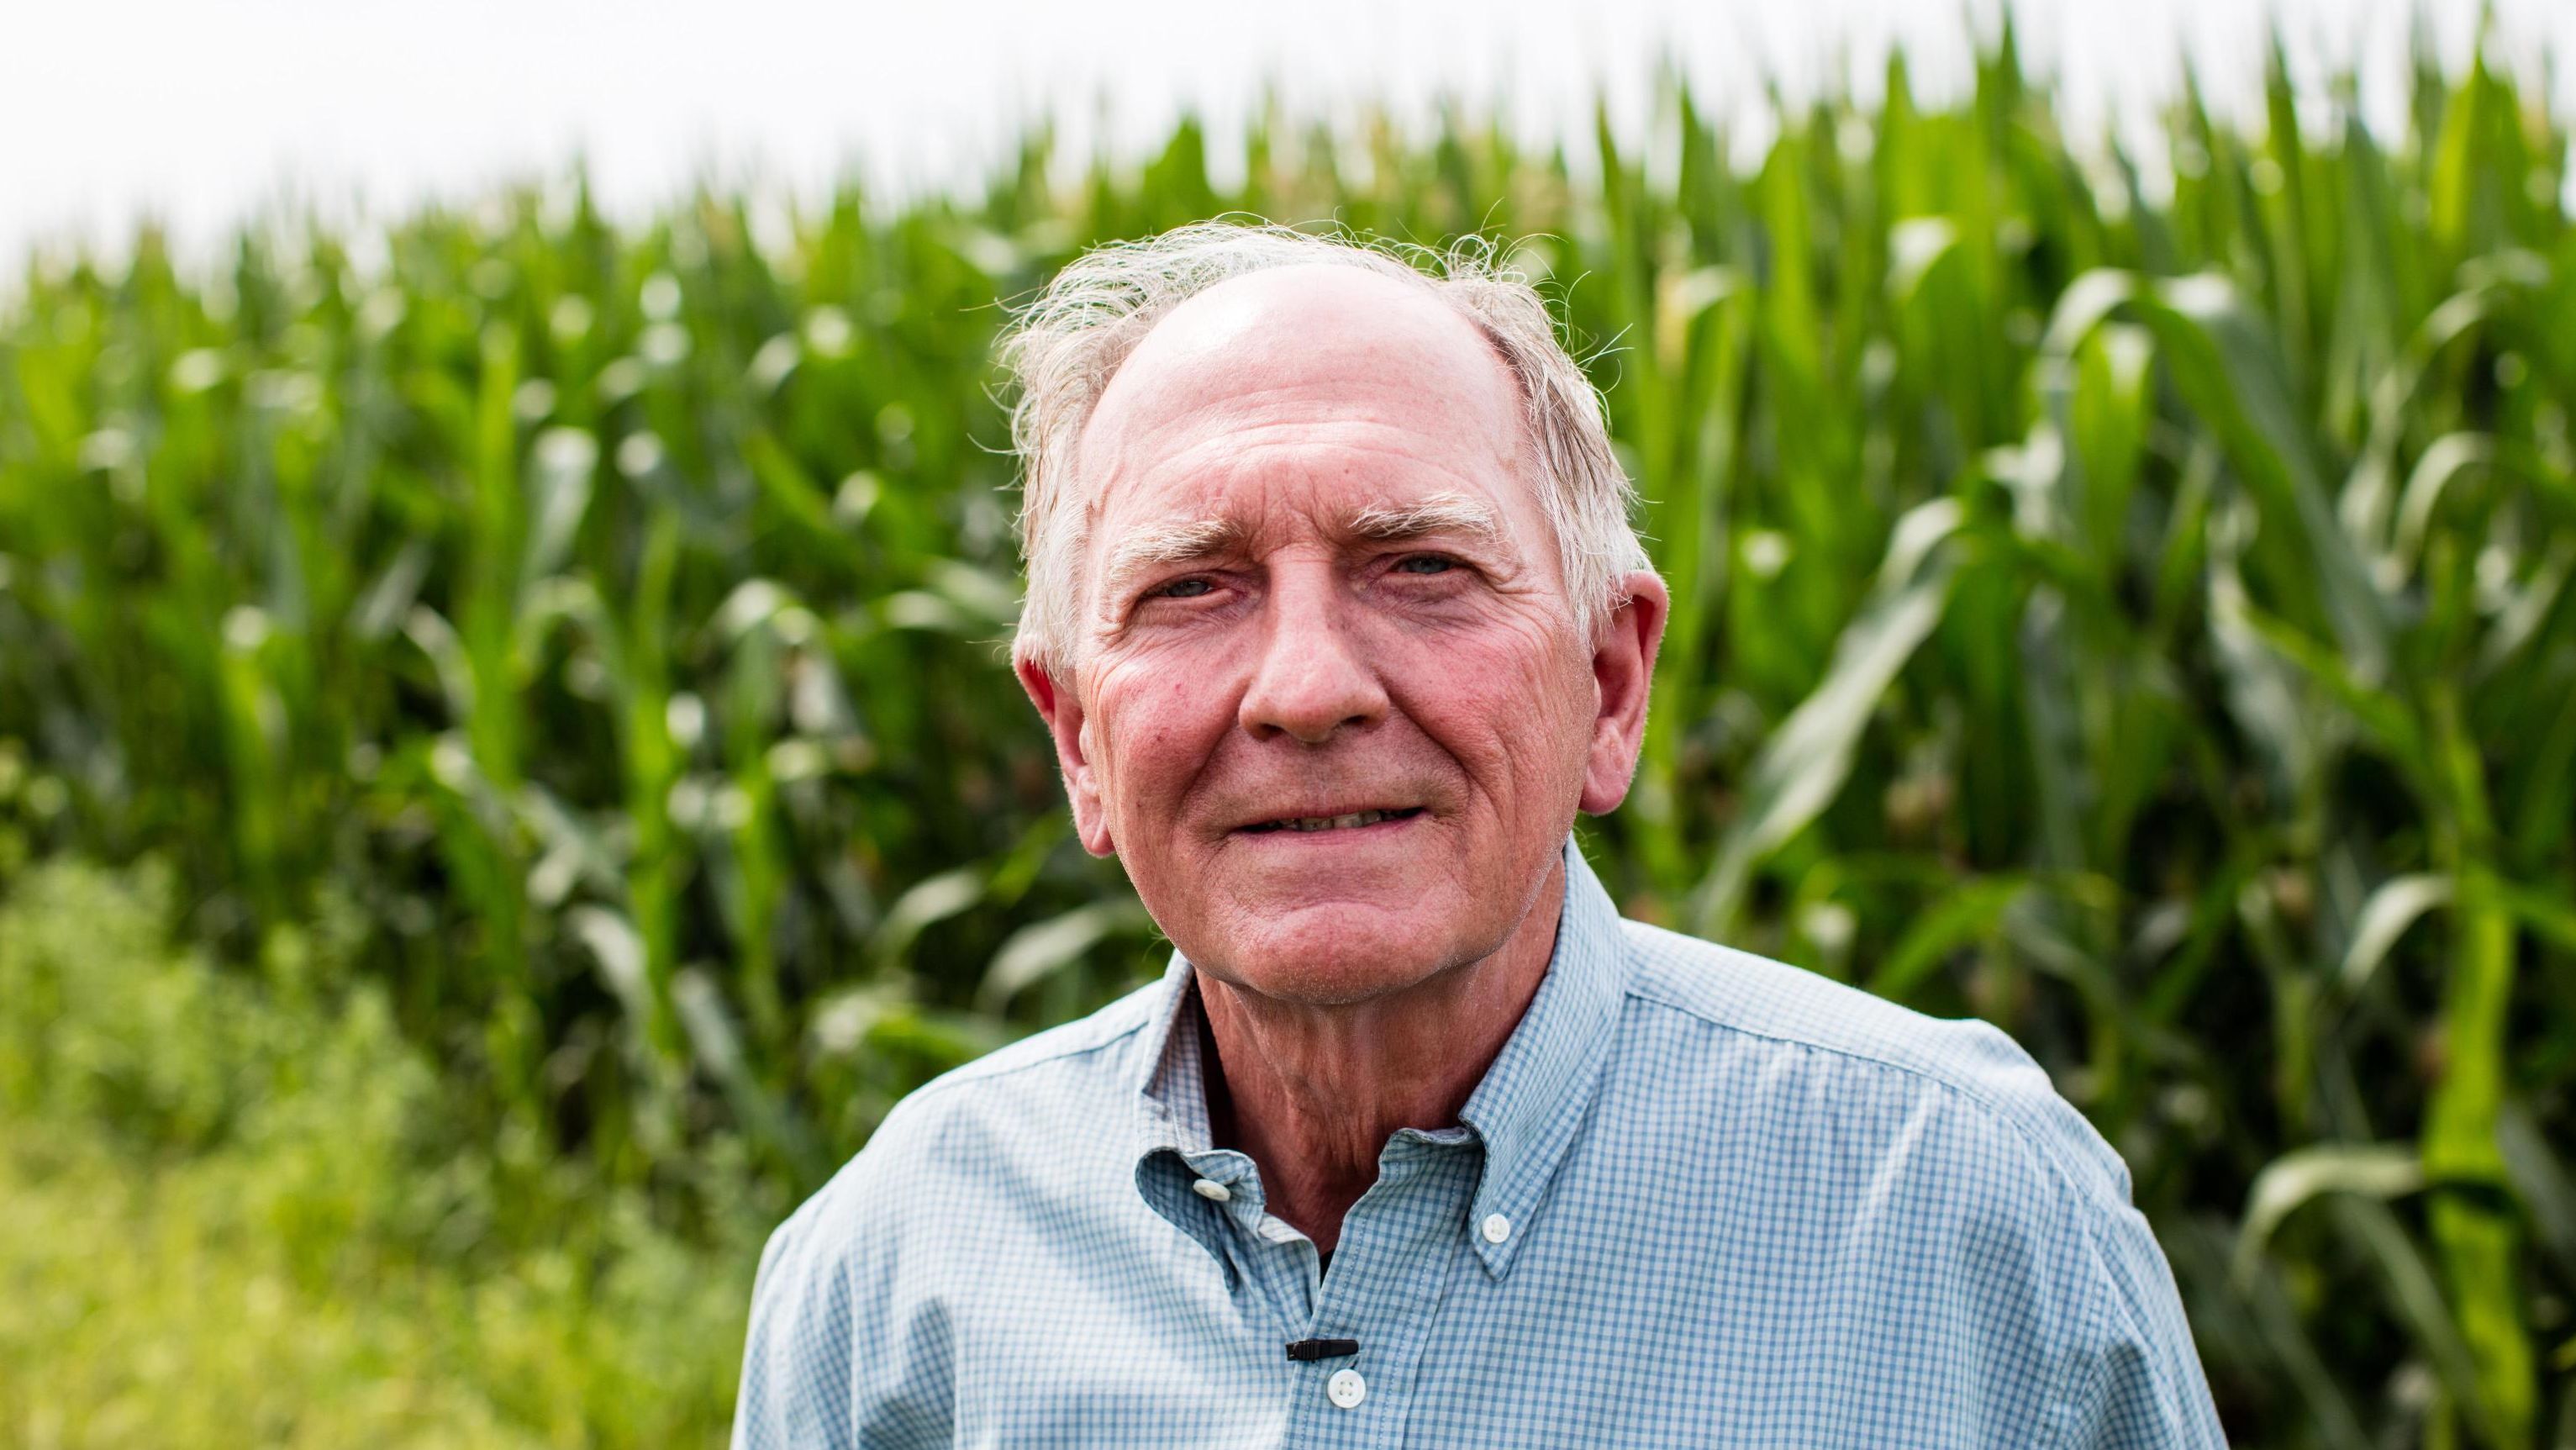 Gene Takle, a leading climate scientist, wants farmers to be allies to fight the climate crisis.